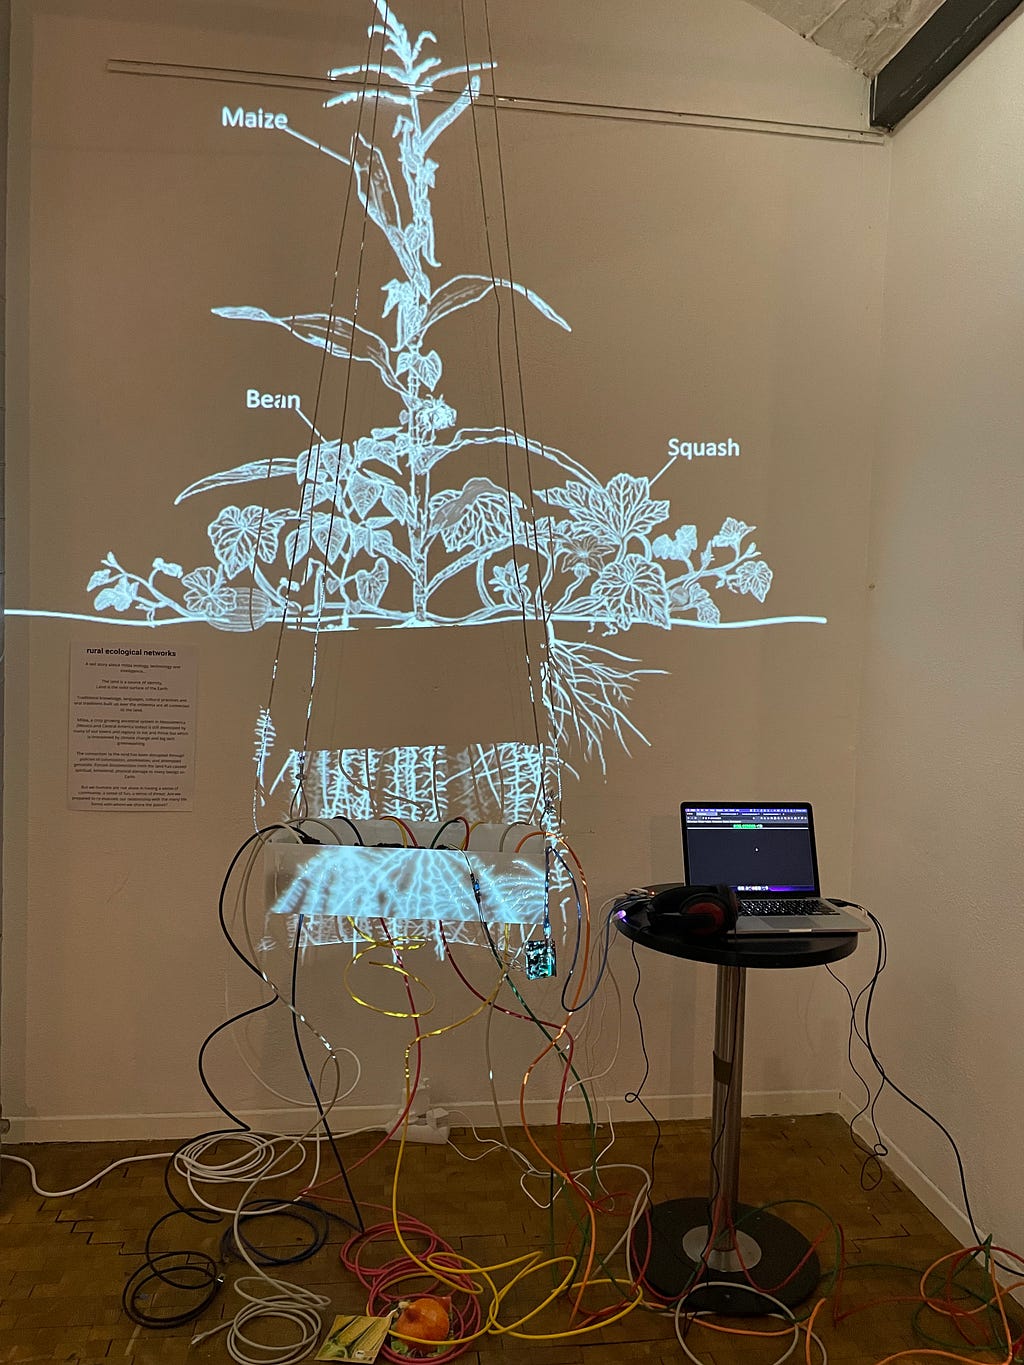 a projected image of a milpa system with a soil moisture sensor that triggers website content with ethernet cables coming down from the soil towards the floor